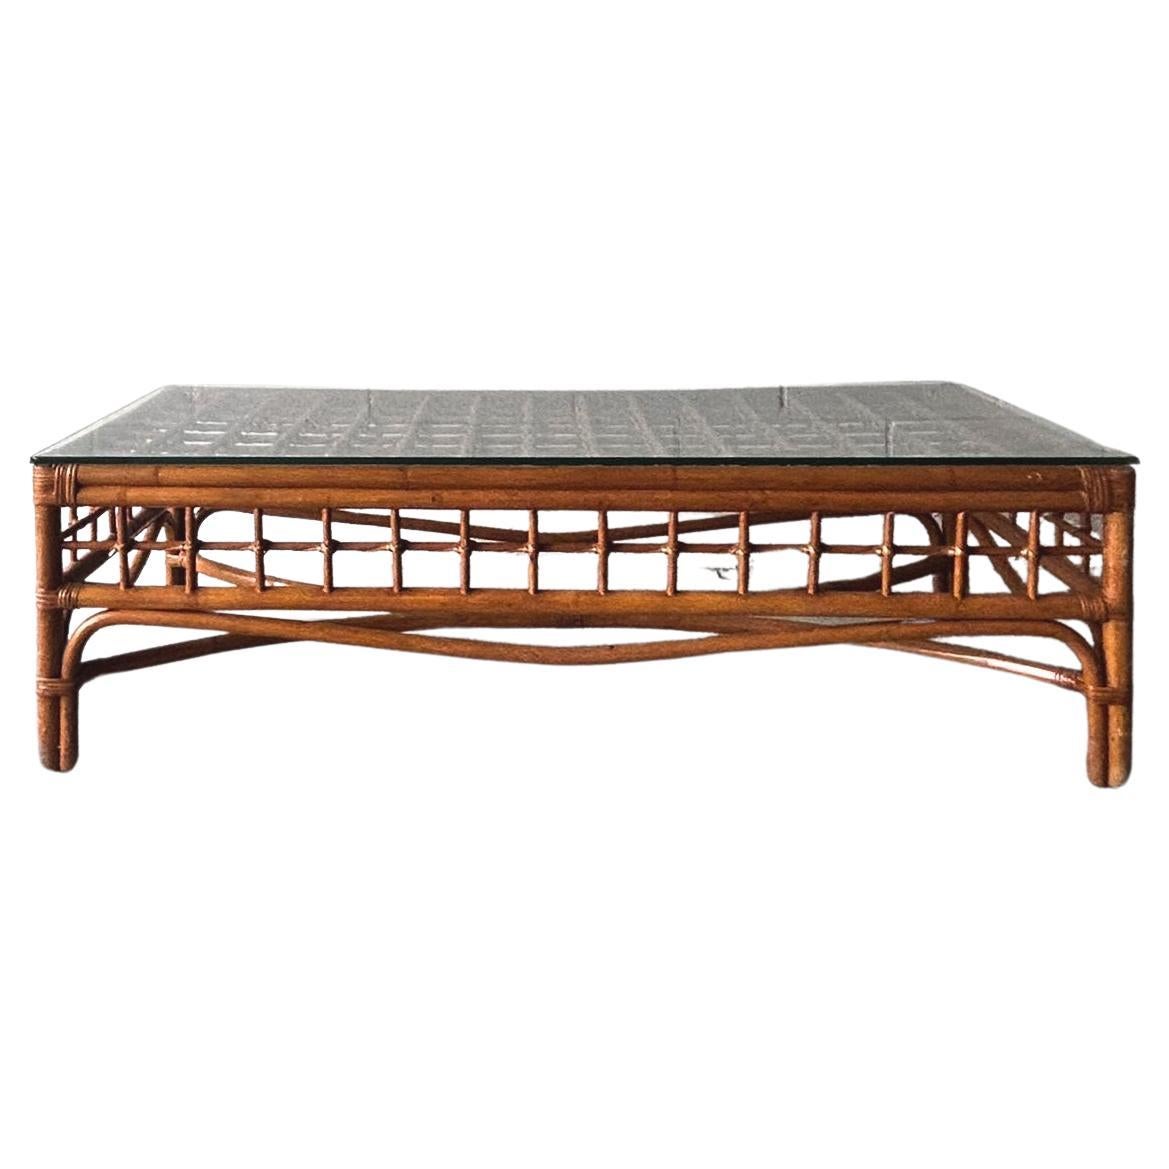 Low Profile Woven Bamboo Coffee Table